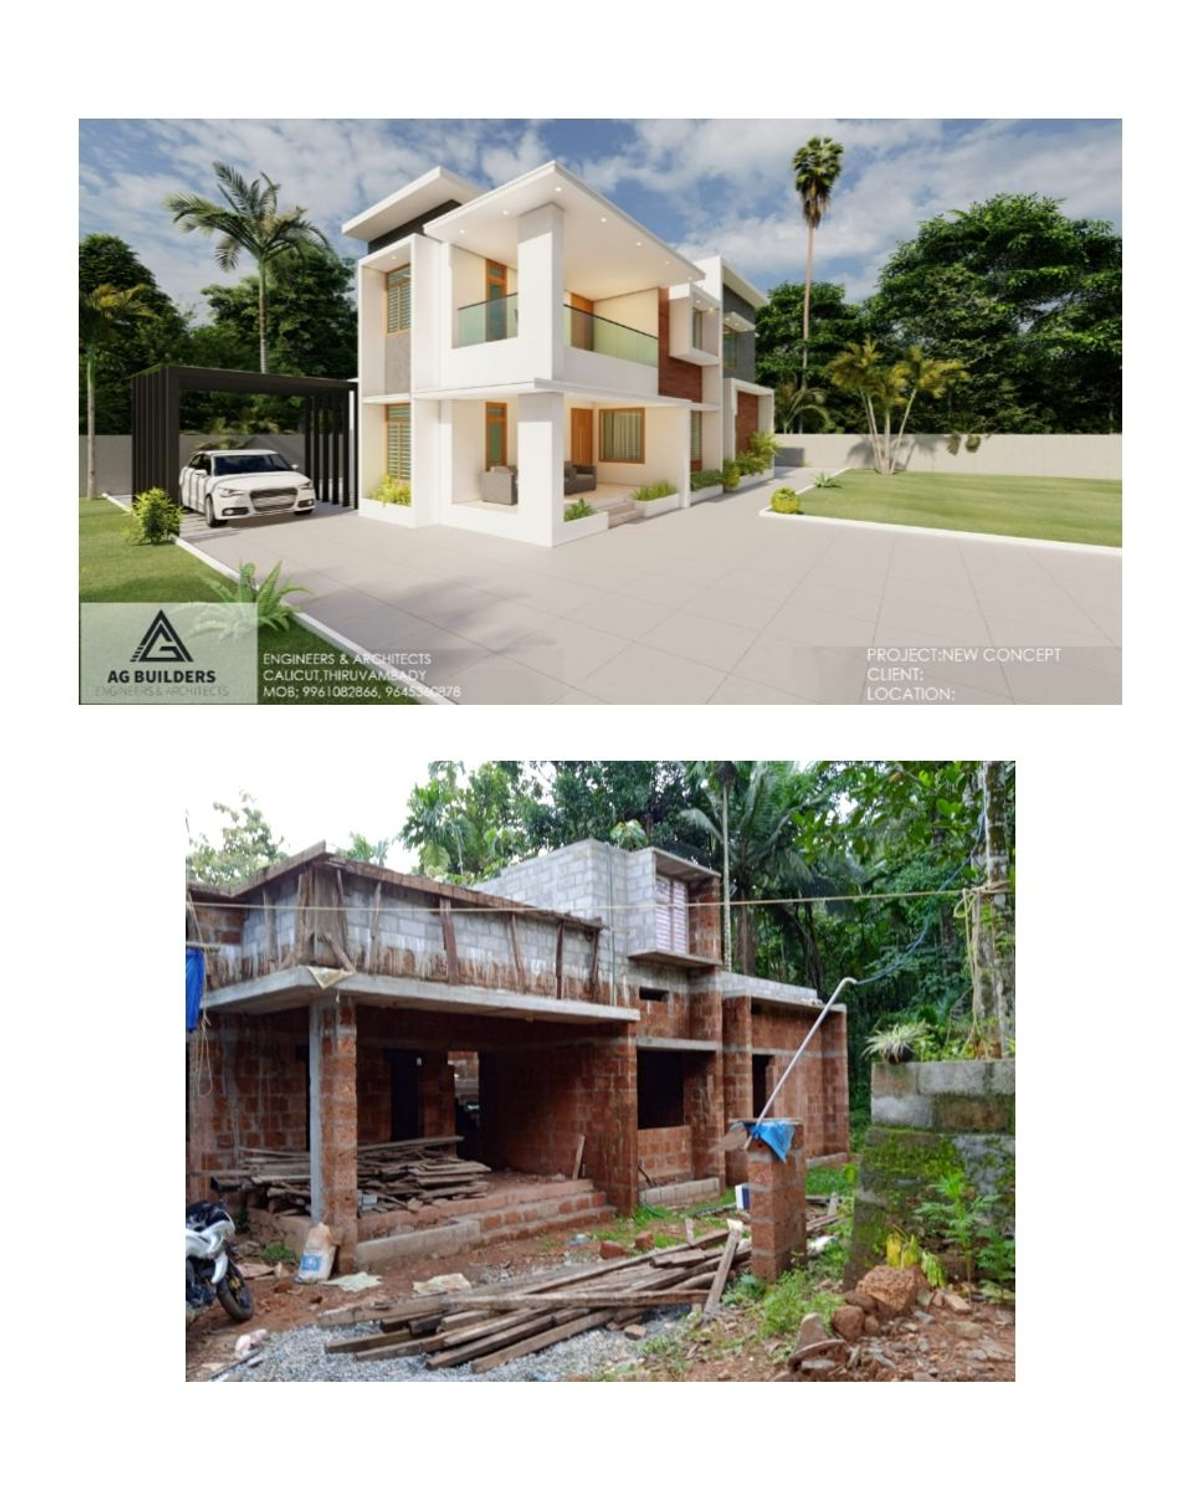 Designs by Civil Engineer AG BUILDERS ENGINEERS AND ARCHITECTS, Kozhikode | Kolo